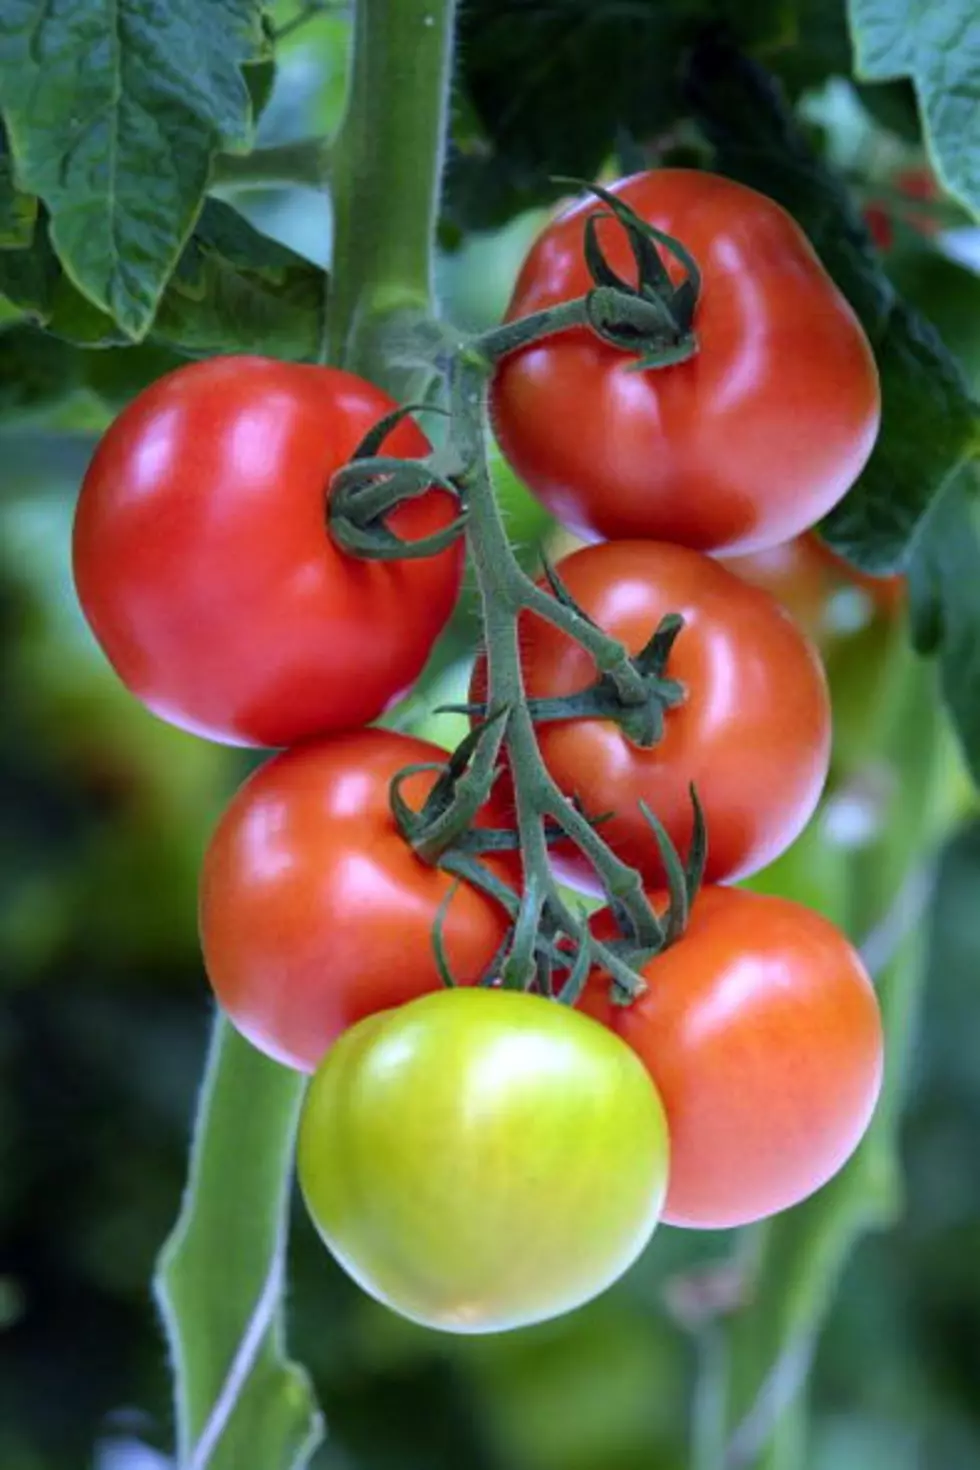 Top 10 Tomato Growing Tips (Part 2)